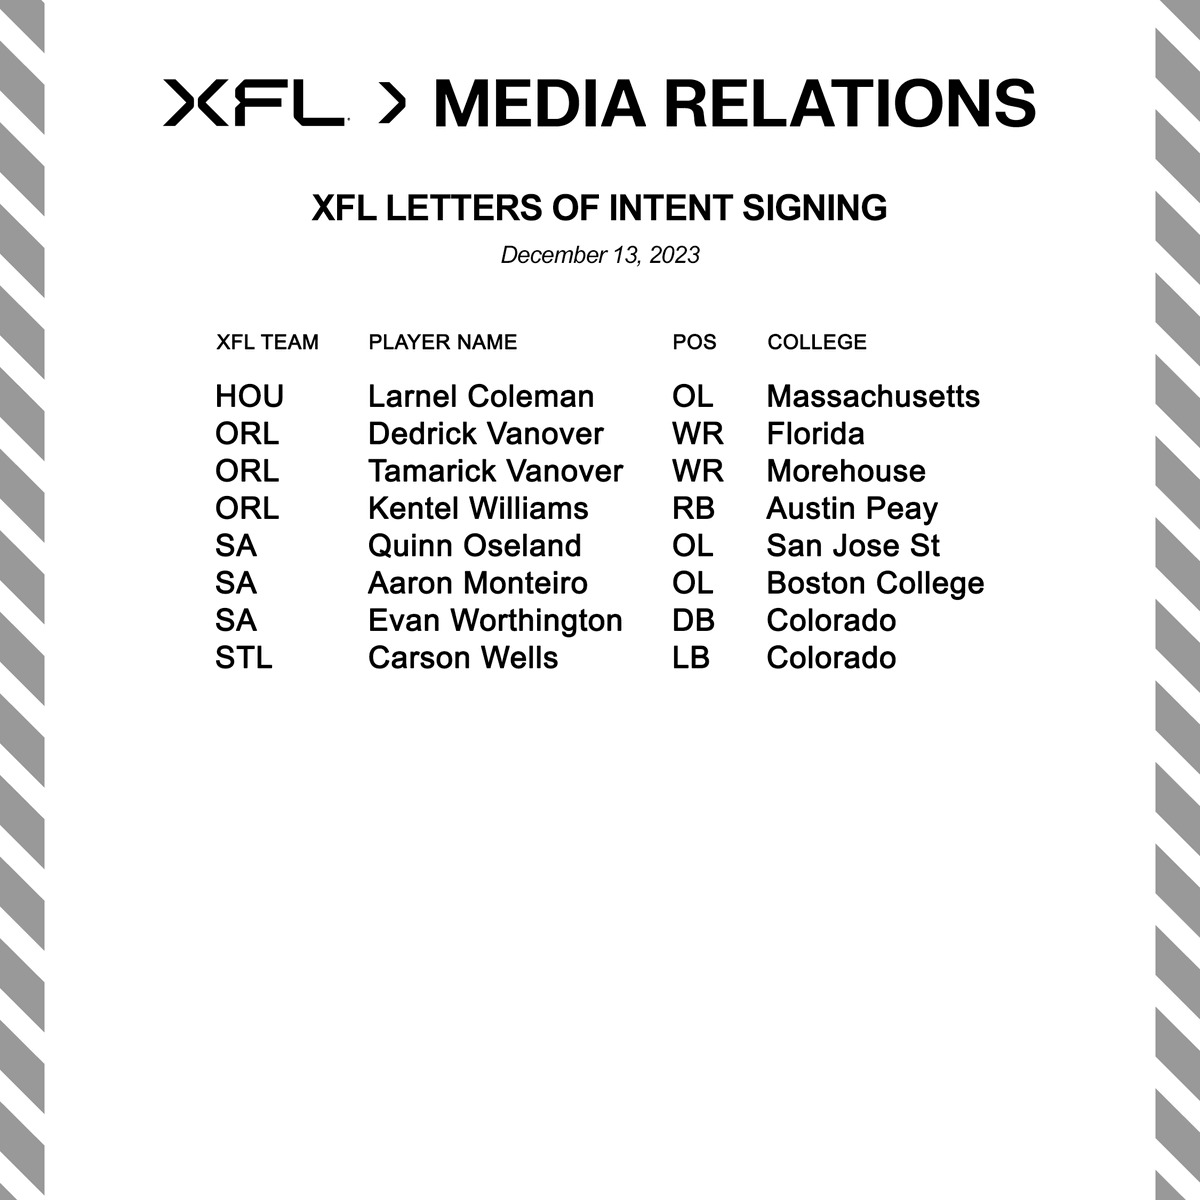 The XFL announced today that the following players have signed Letters of Intent: